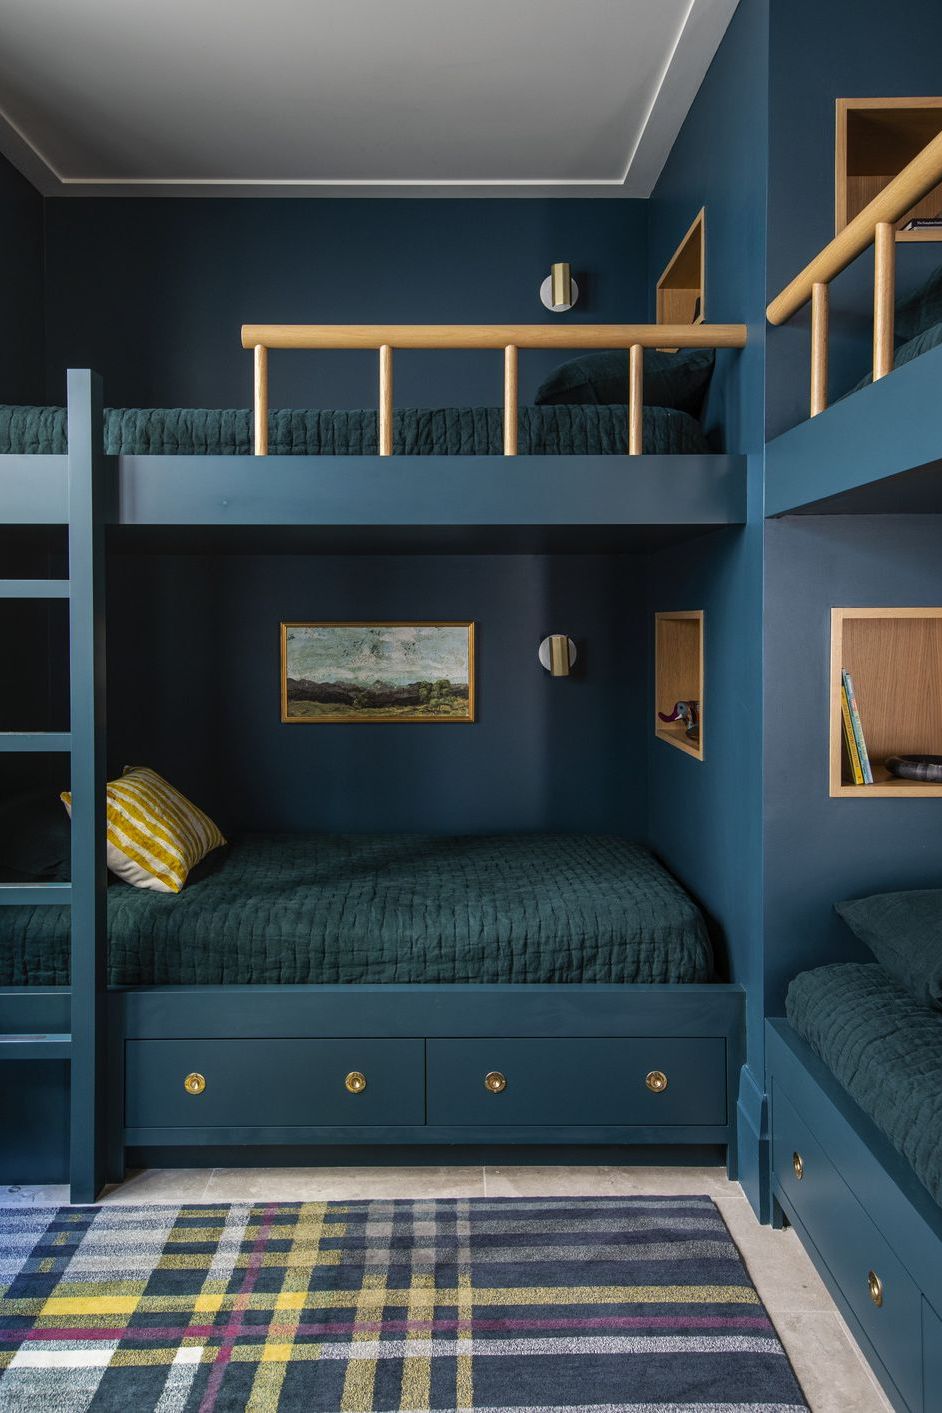 a room with bunk beds